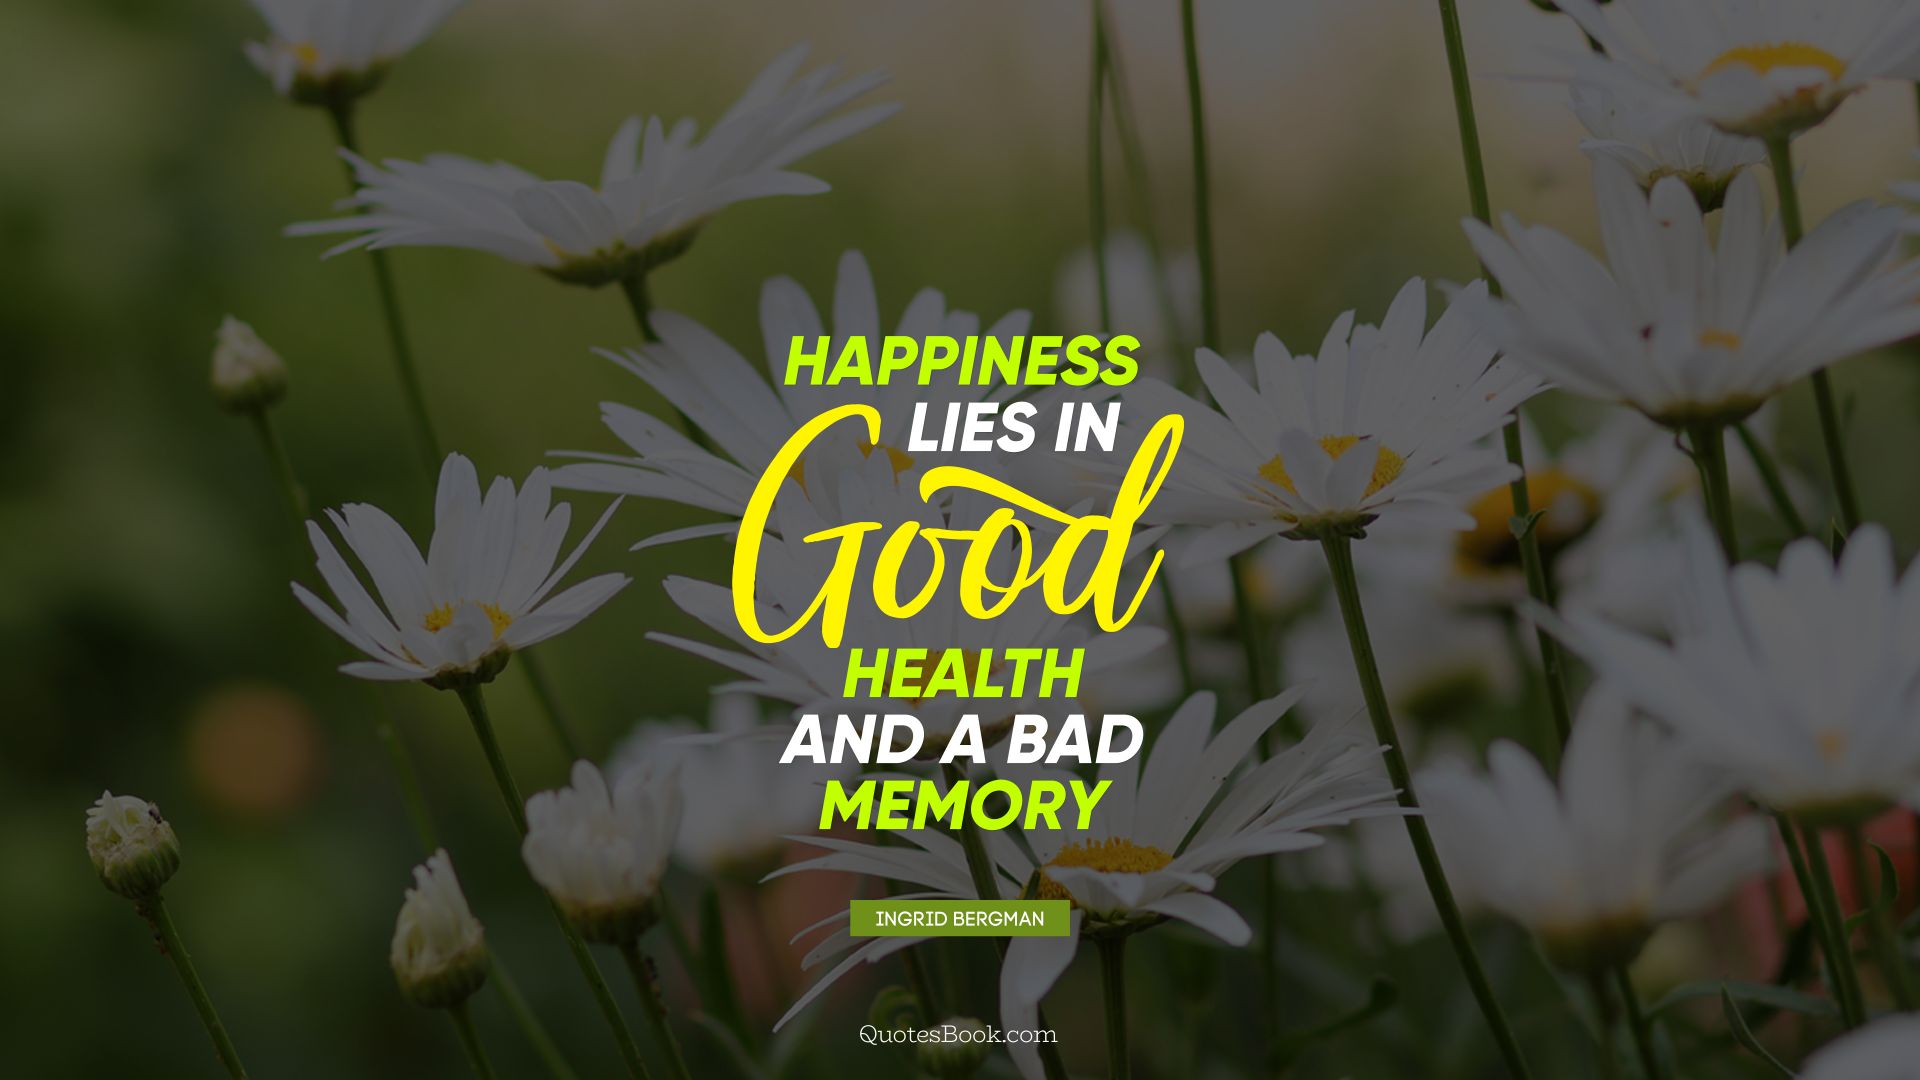 Happiness lies in good health and a bad memory. - Quote by Ingrid Bergman